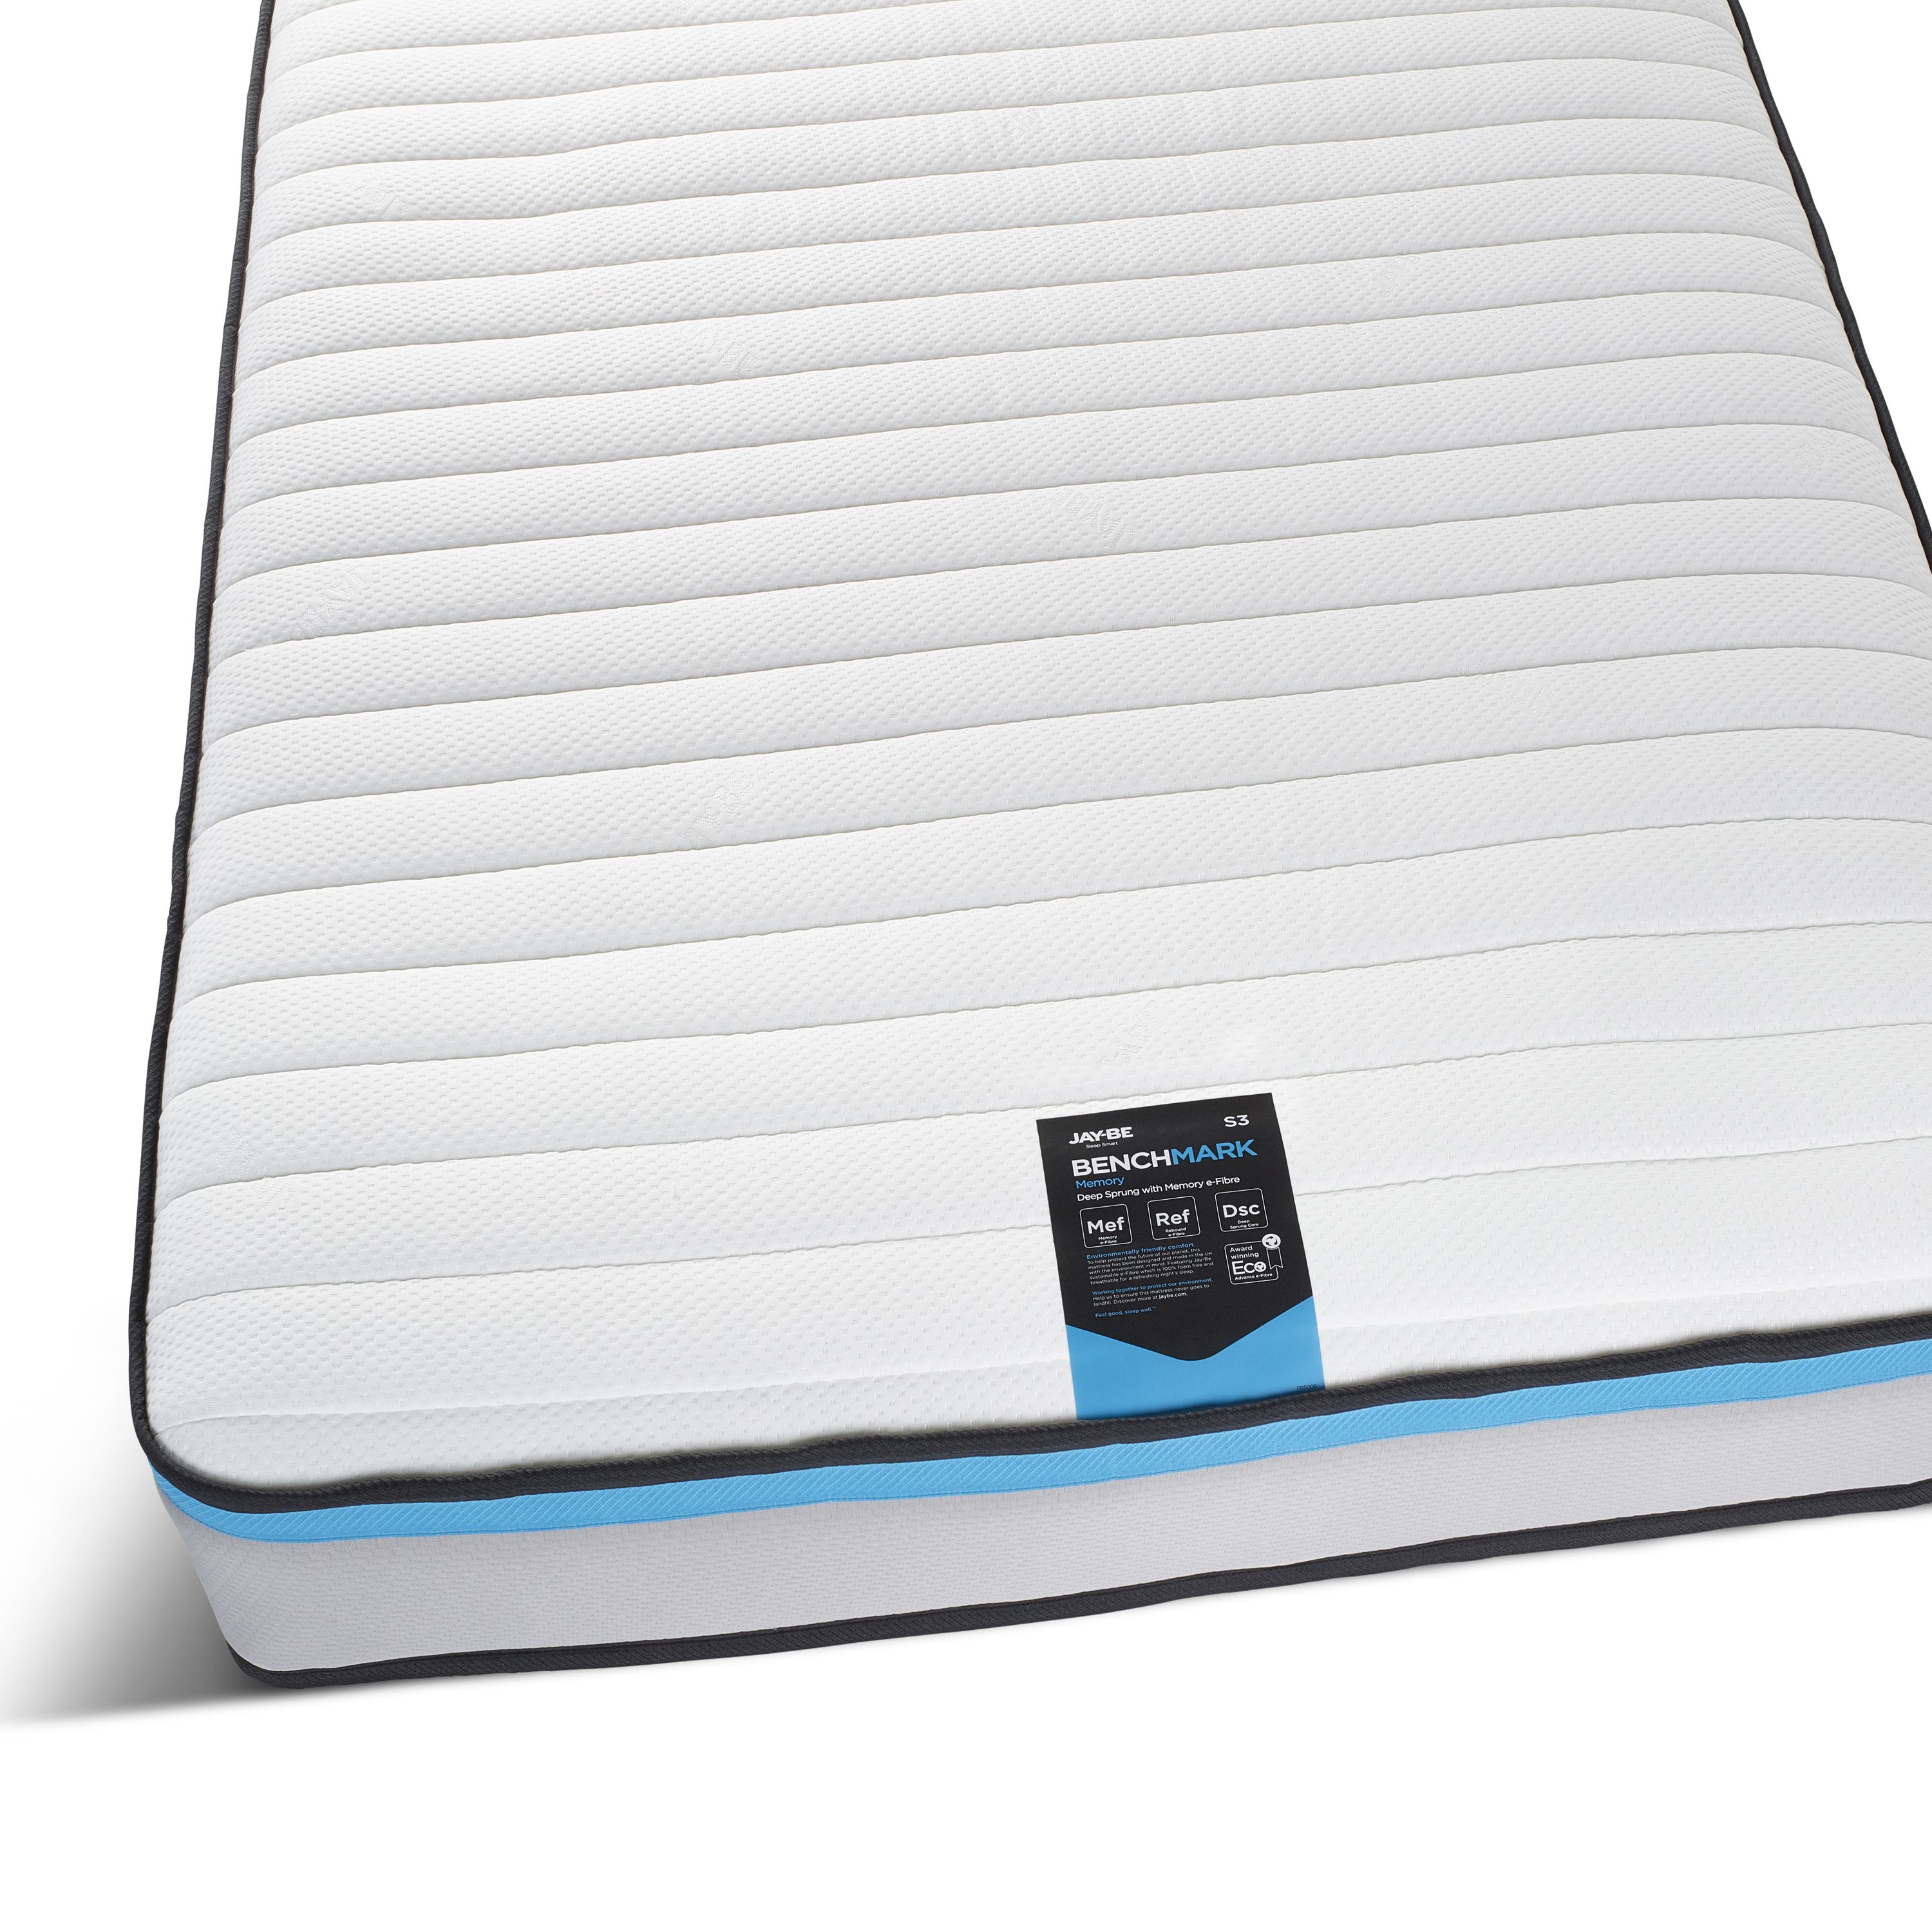 Jay-Be Benchmark S3 Memory Eco Friendly Open coil Water resistant Single Mattress